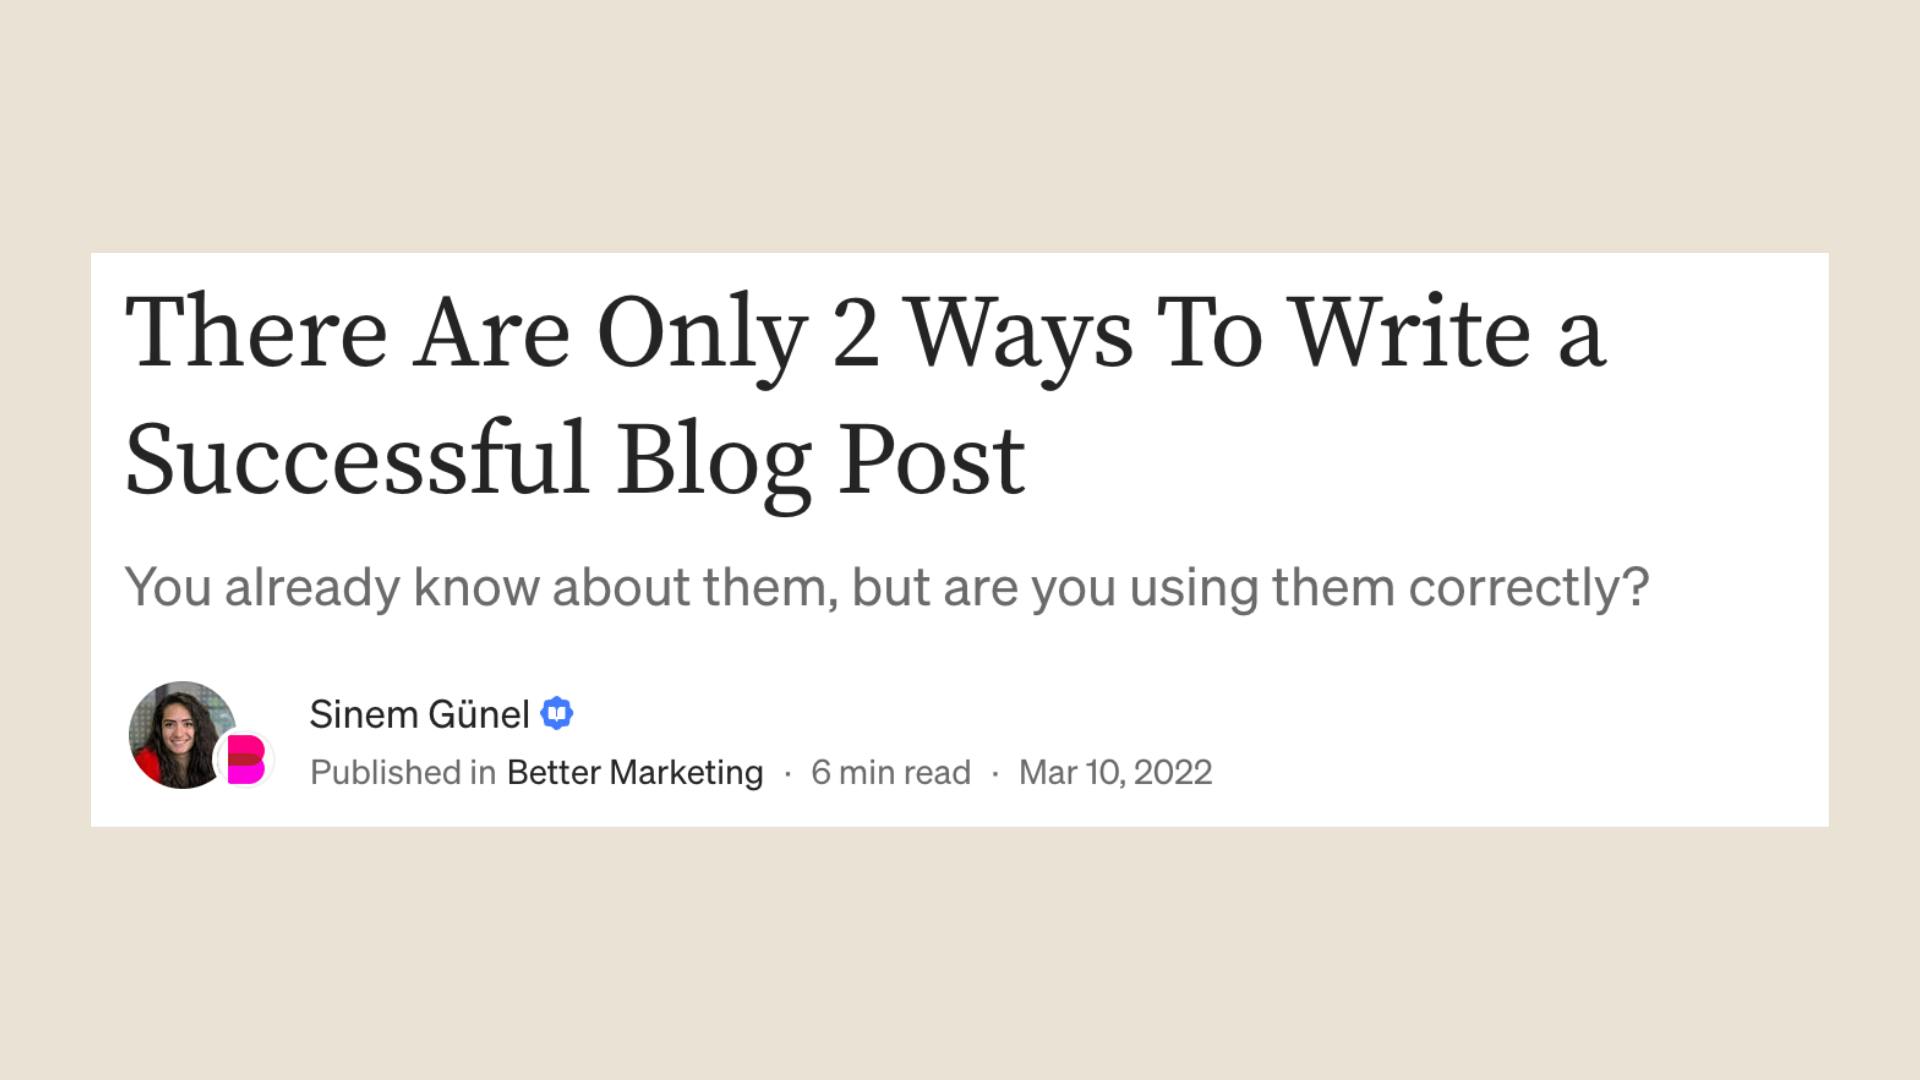 Screenshot of an article titled "There Are Only 2 Ways To Write a Successful Blog Post"